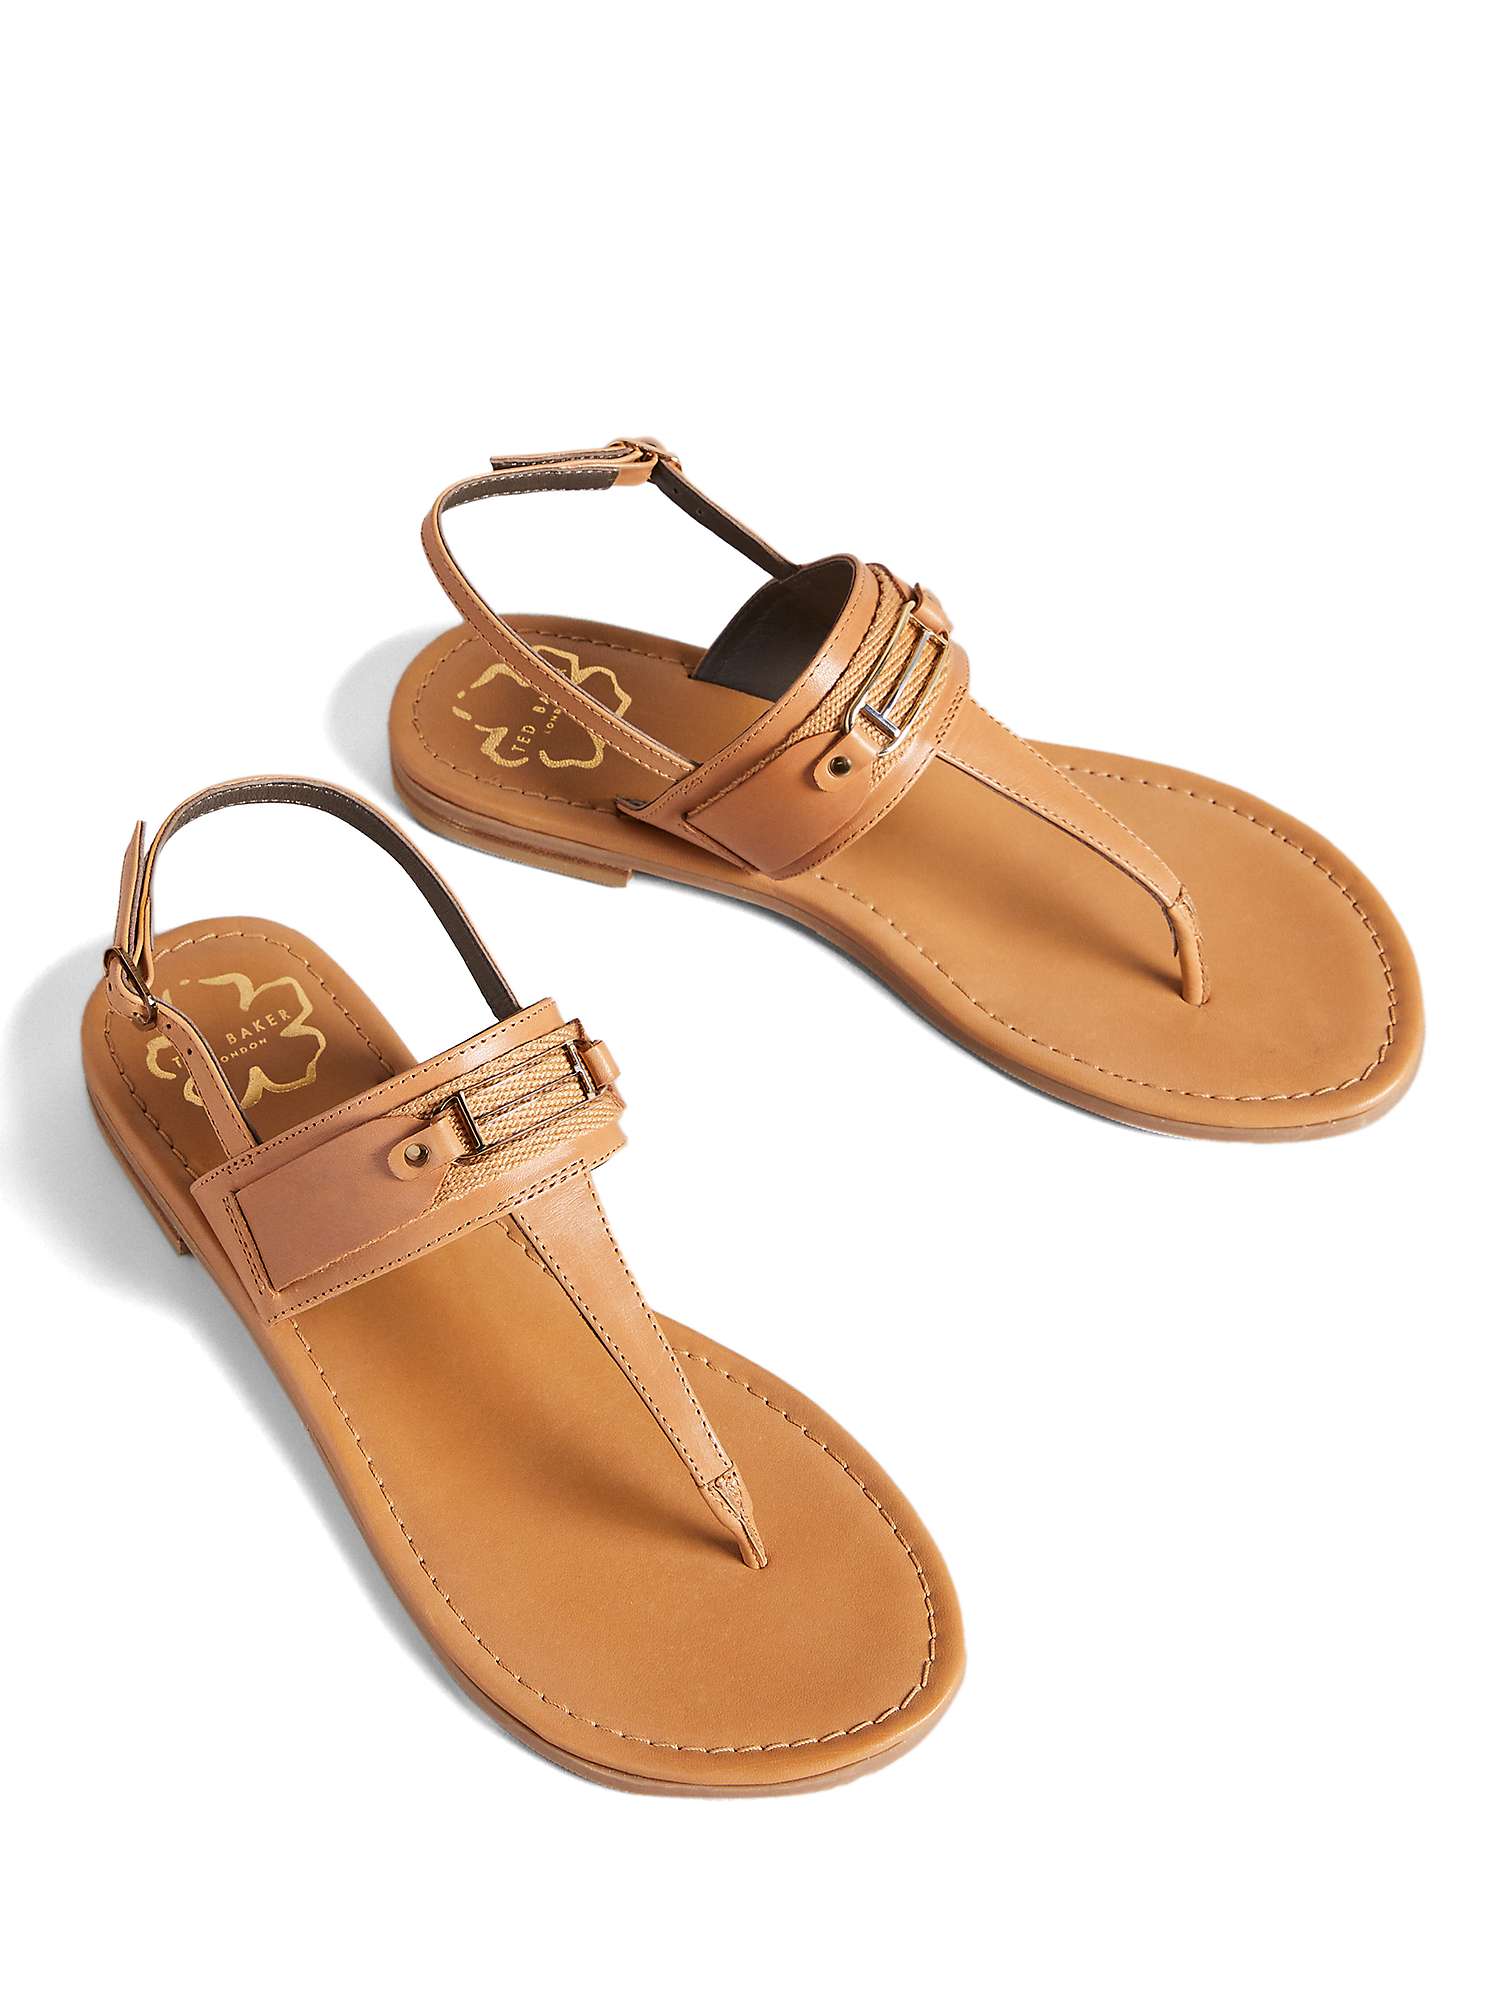 Ted Baker Jazmiah Leather Flat Sandals in Tan Brown Womens Shoes Flats and flat shoes Flat sandals 